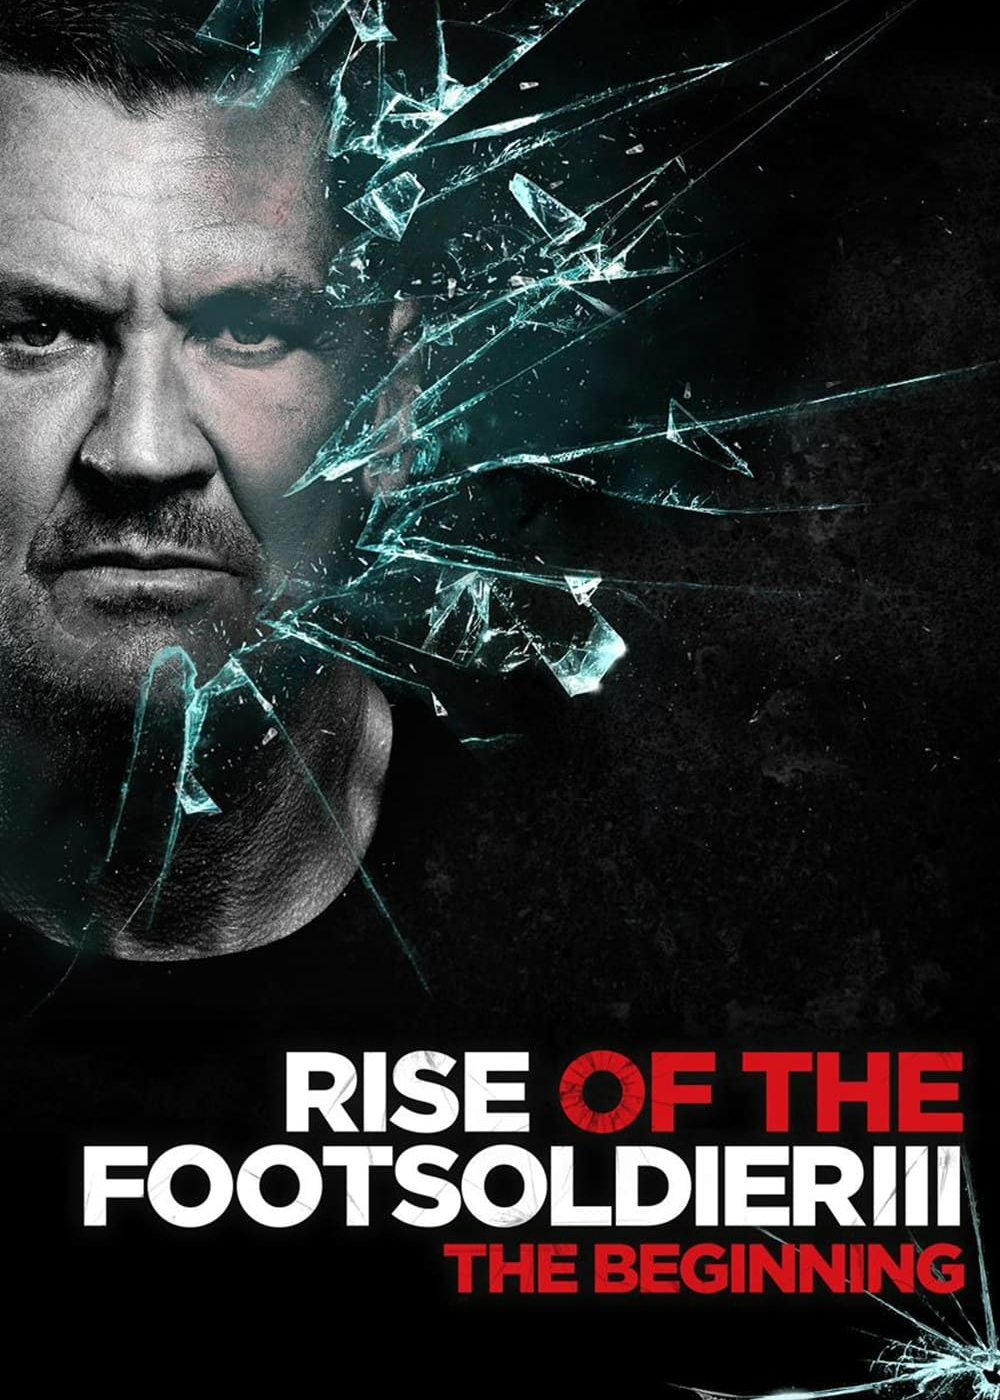 Poster Phim Rise of the Footsoldier 3 (Rise of the Footsoldier 3)